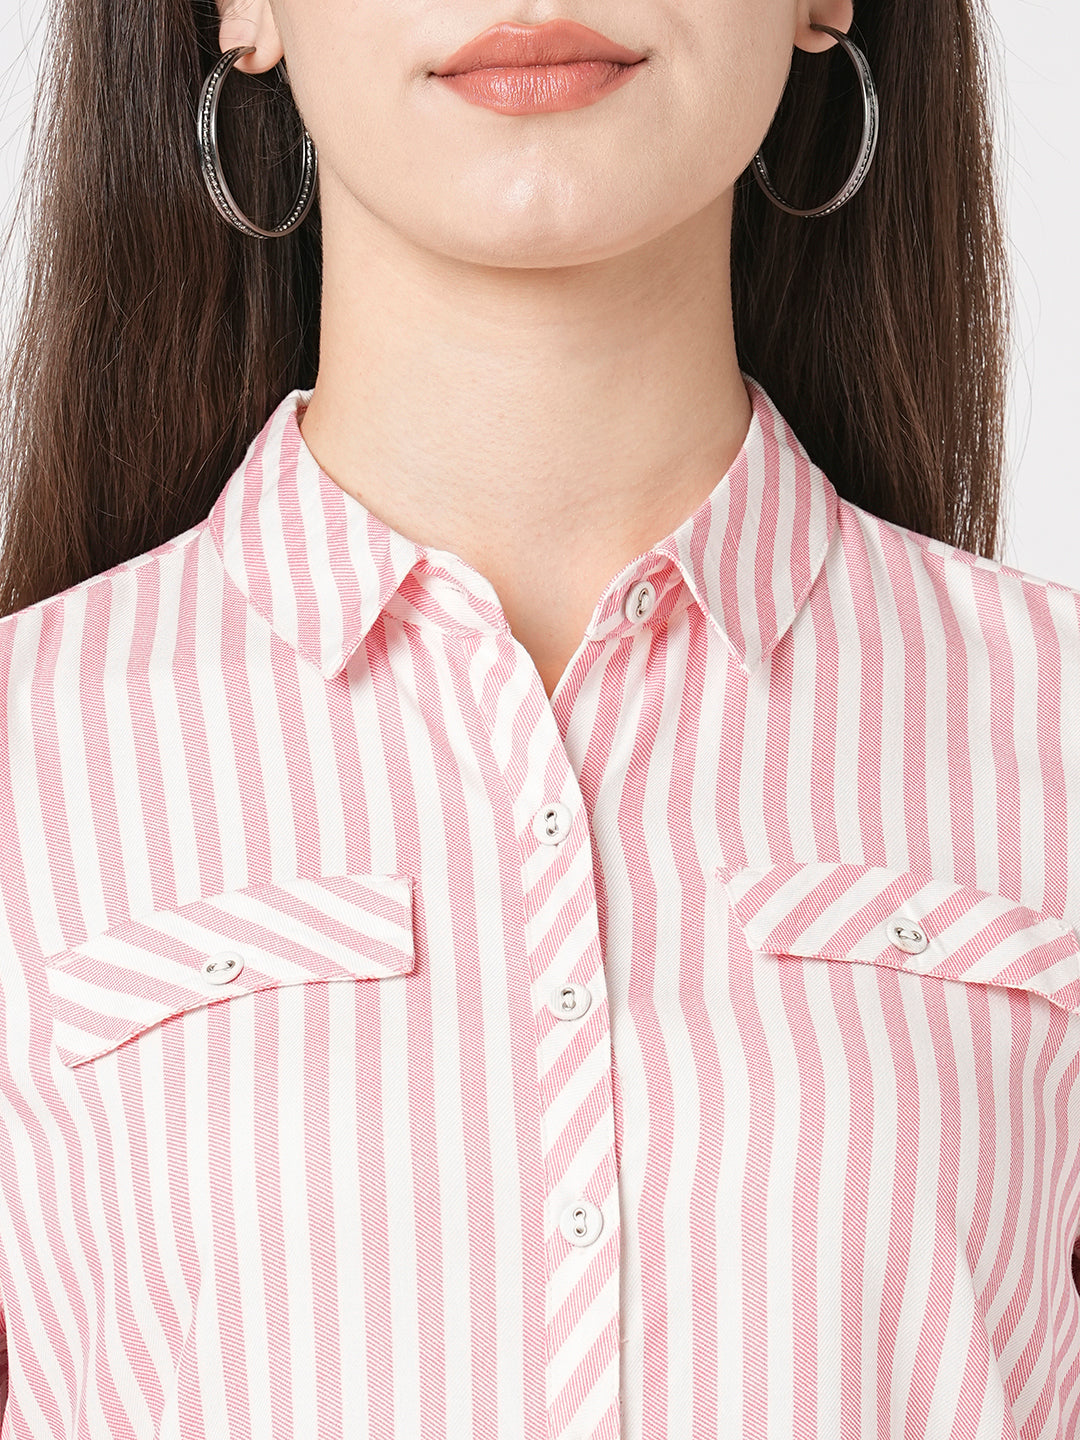 Striped Slim Fit Curved Spread Collar Casual Shirt